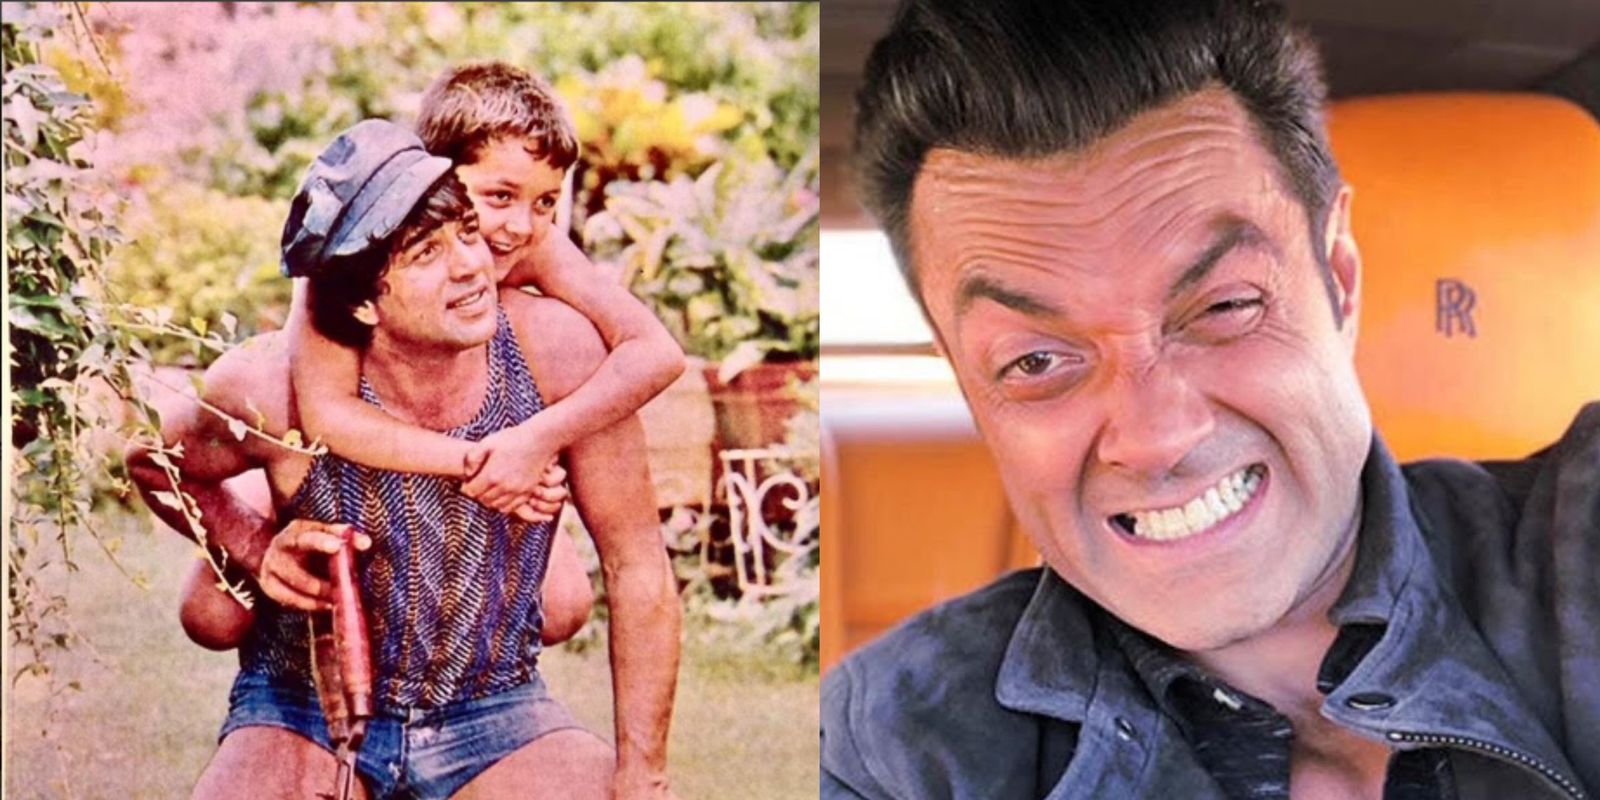 Bobby Deol Reveals Why People Called Him ‘Behenji’ On The Phone When He Was Younger